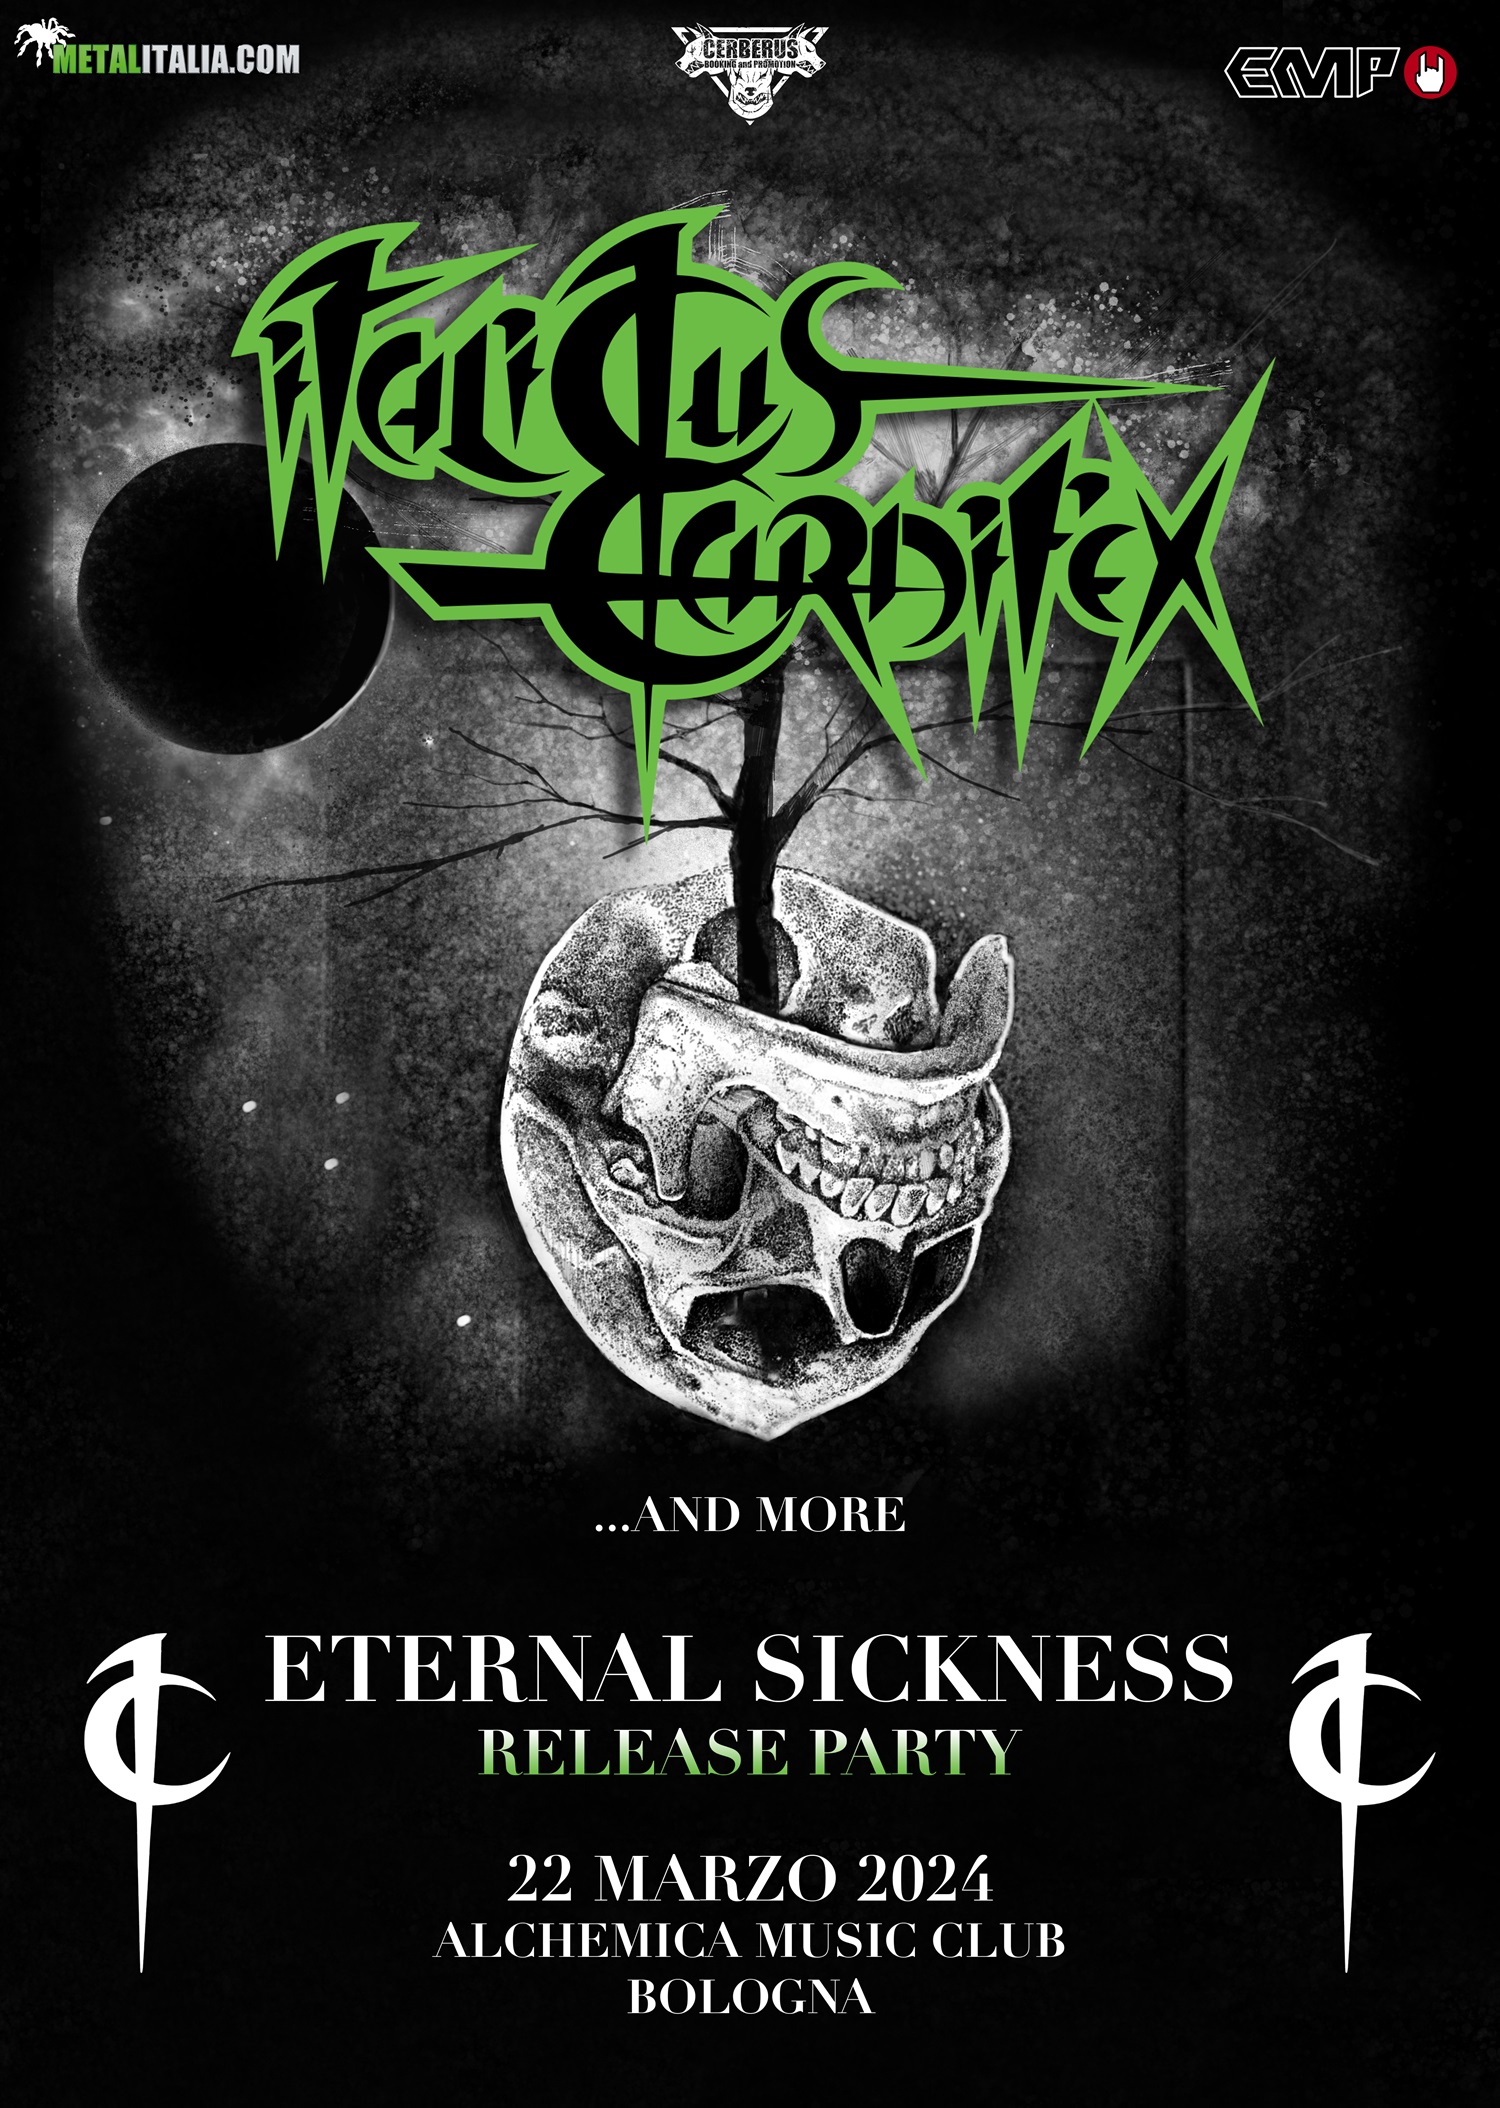 ITALICUS CARNIFEX Eternal Sickness” release party + Guest @ Alchemica Music Club-Bologna